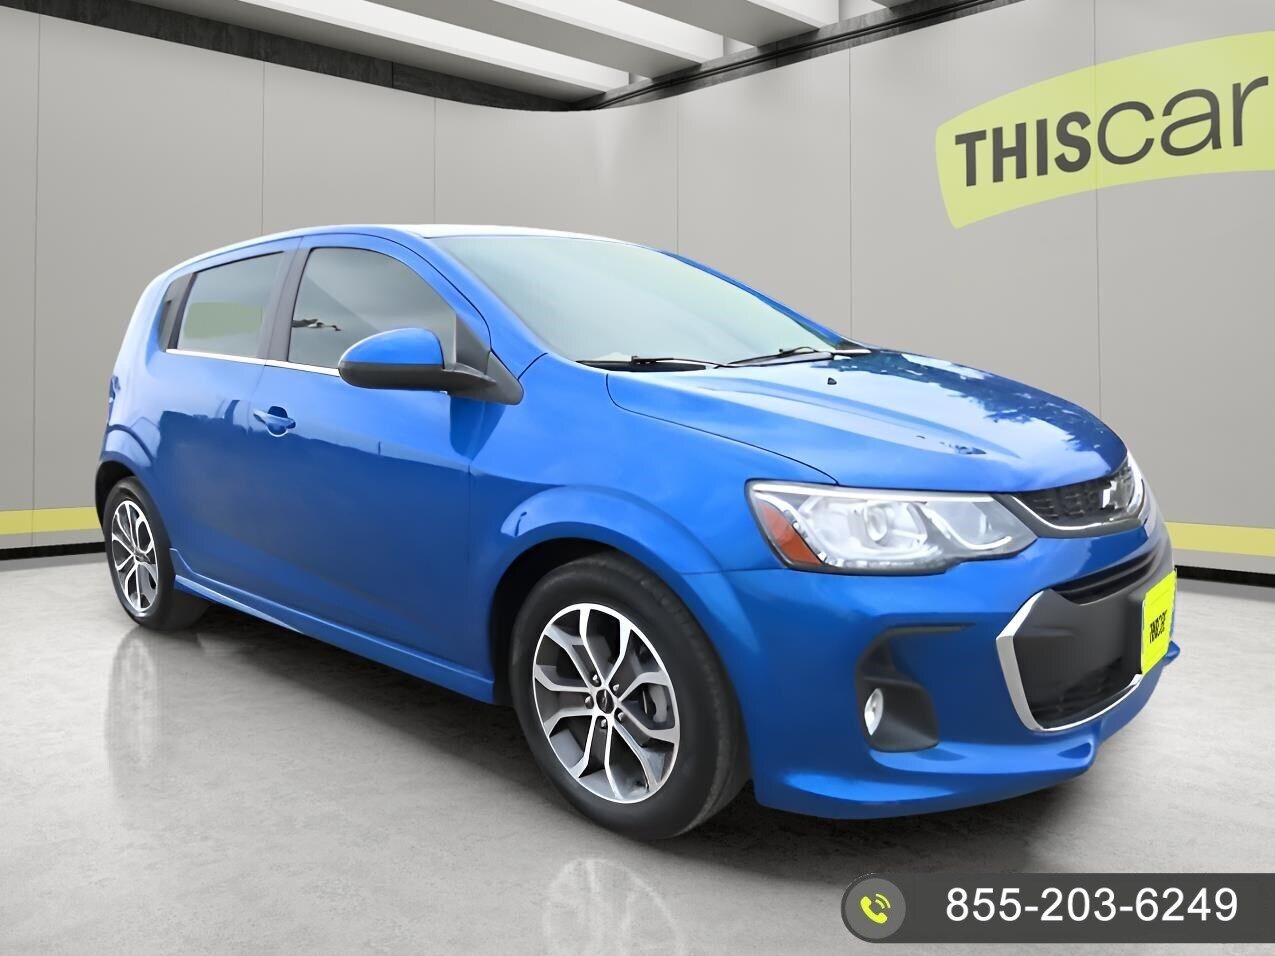 2020 Chevrolet Sonic Blue -- WE TAKE TRADE INS!